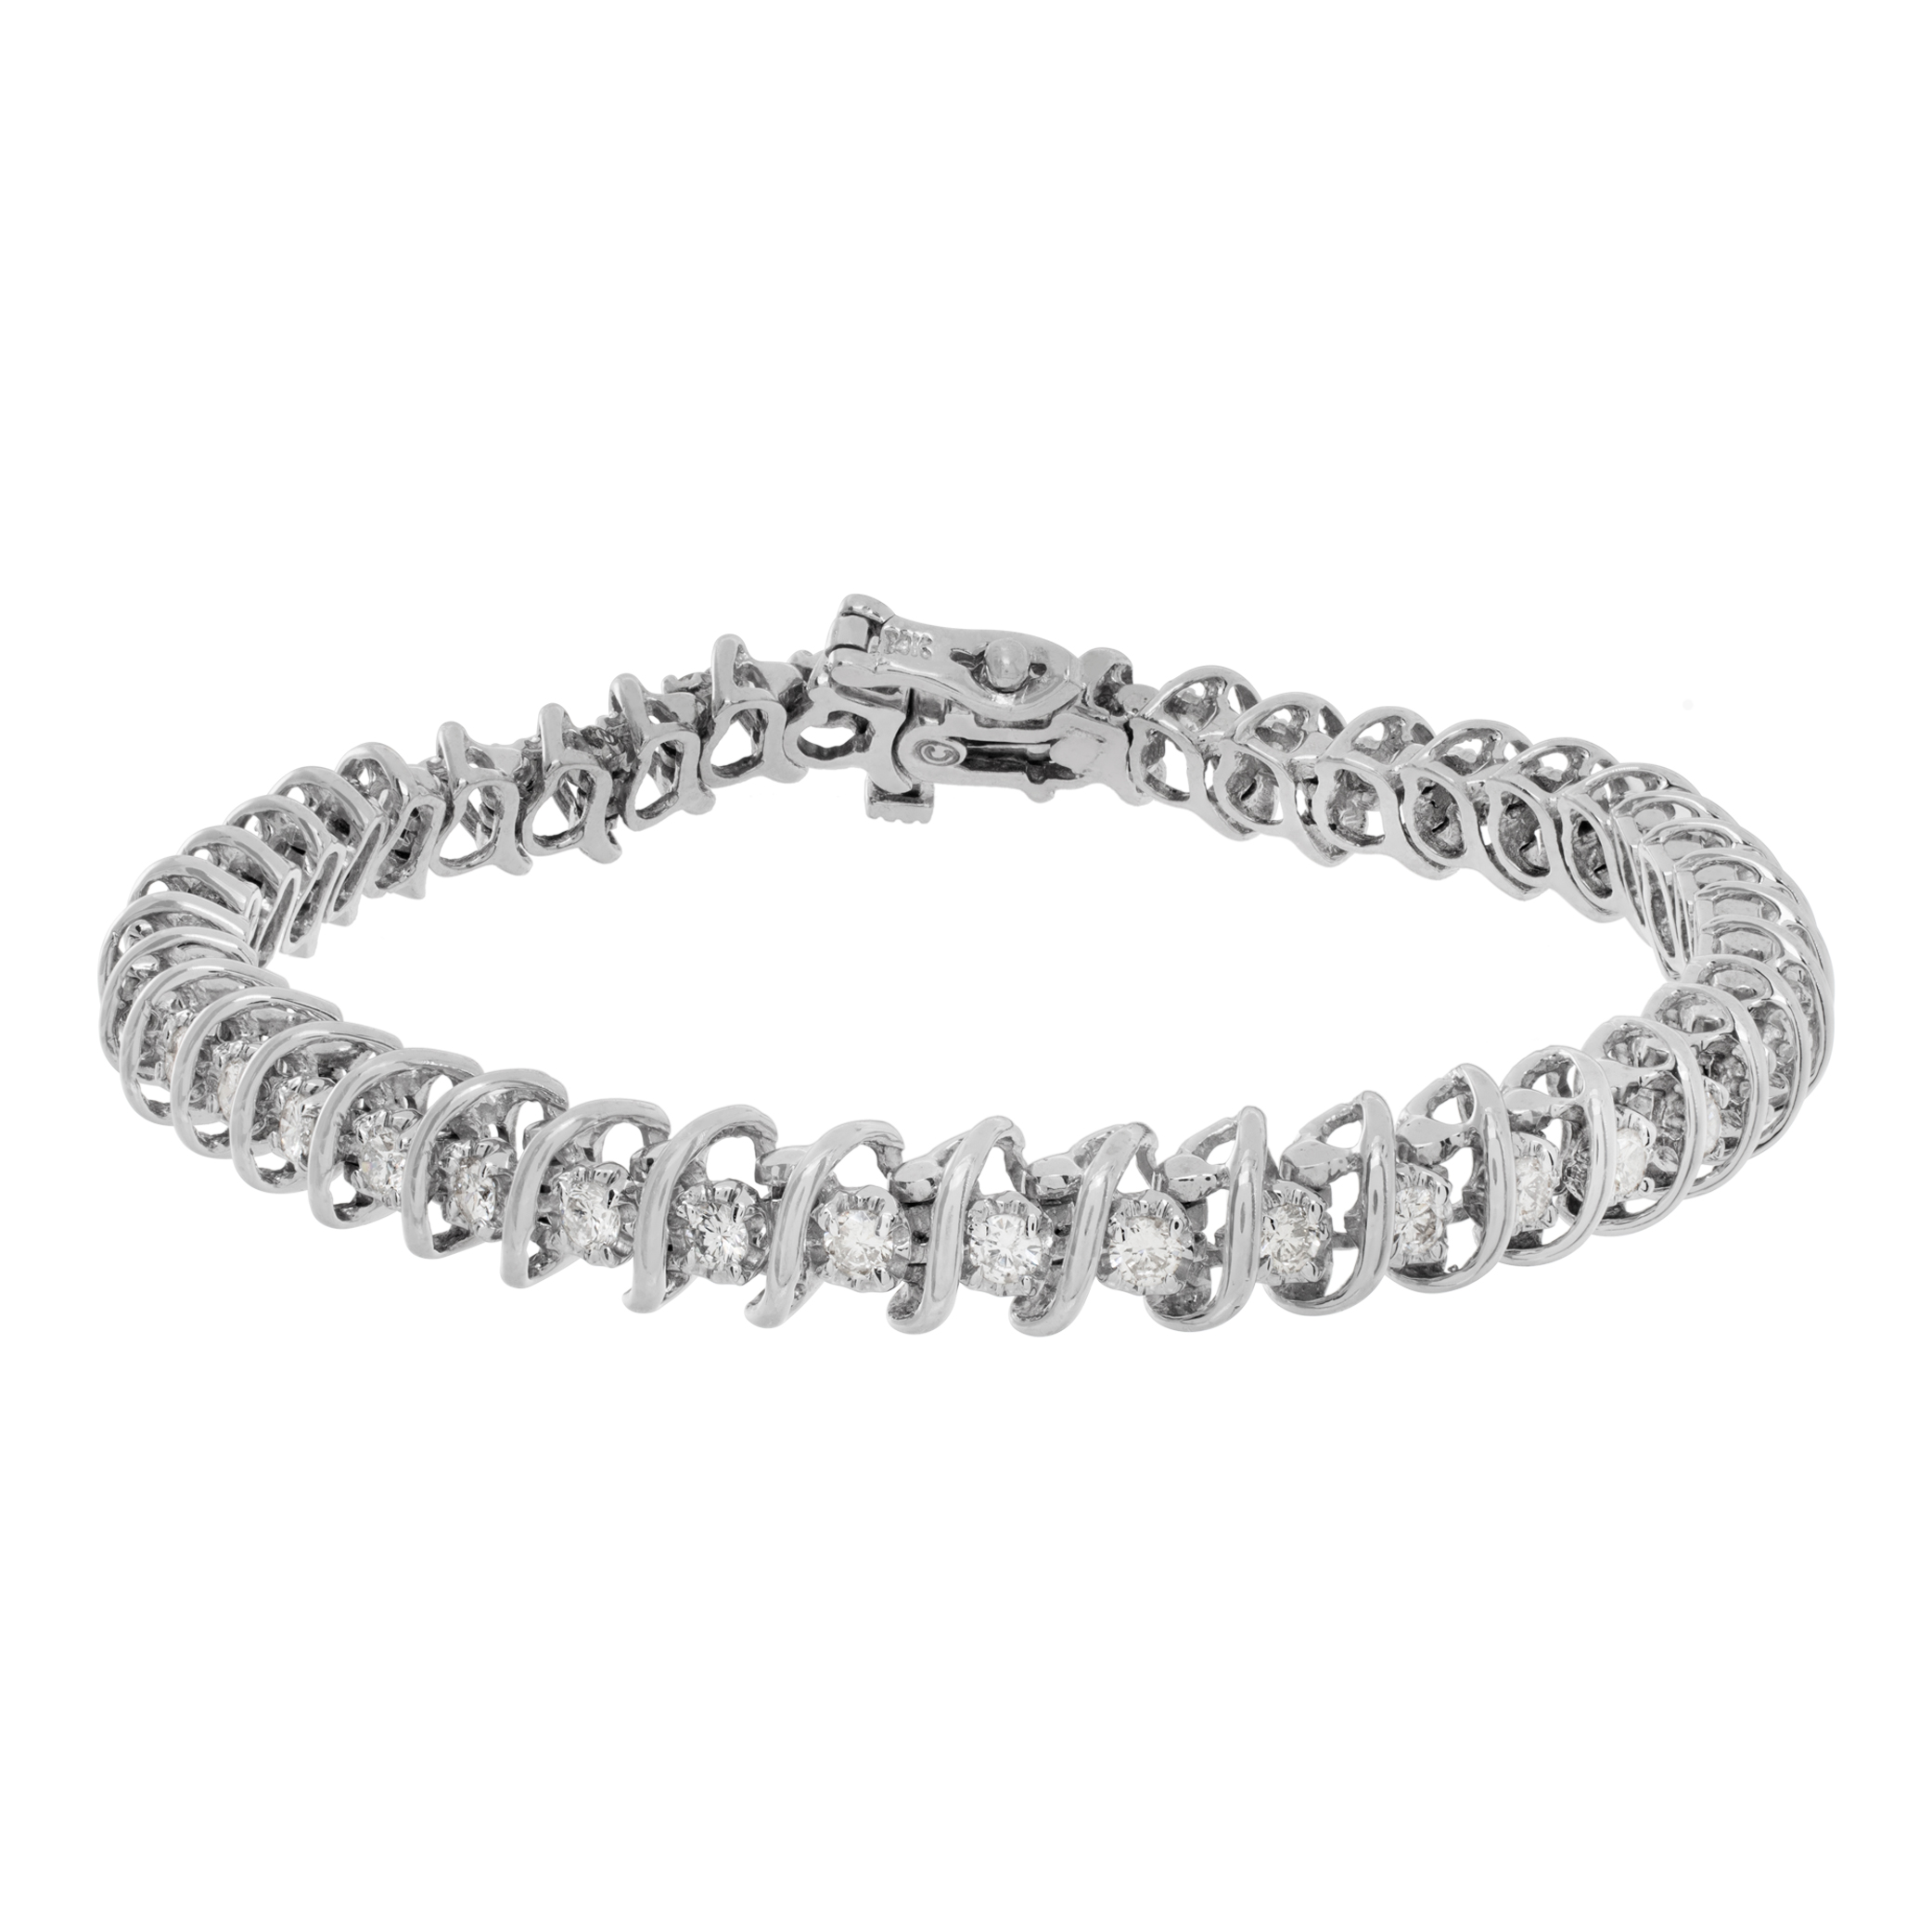 Diamond line bracelet in 14k white gold with approximately 2 carats in round diamonds H-I Color, SI2 Clarity. Length 7.25 inches. (Stones)